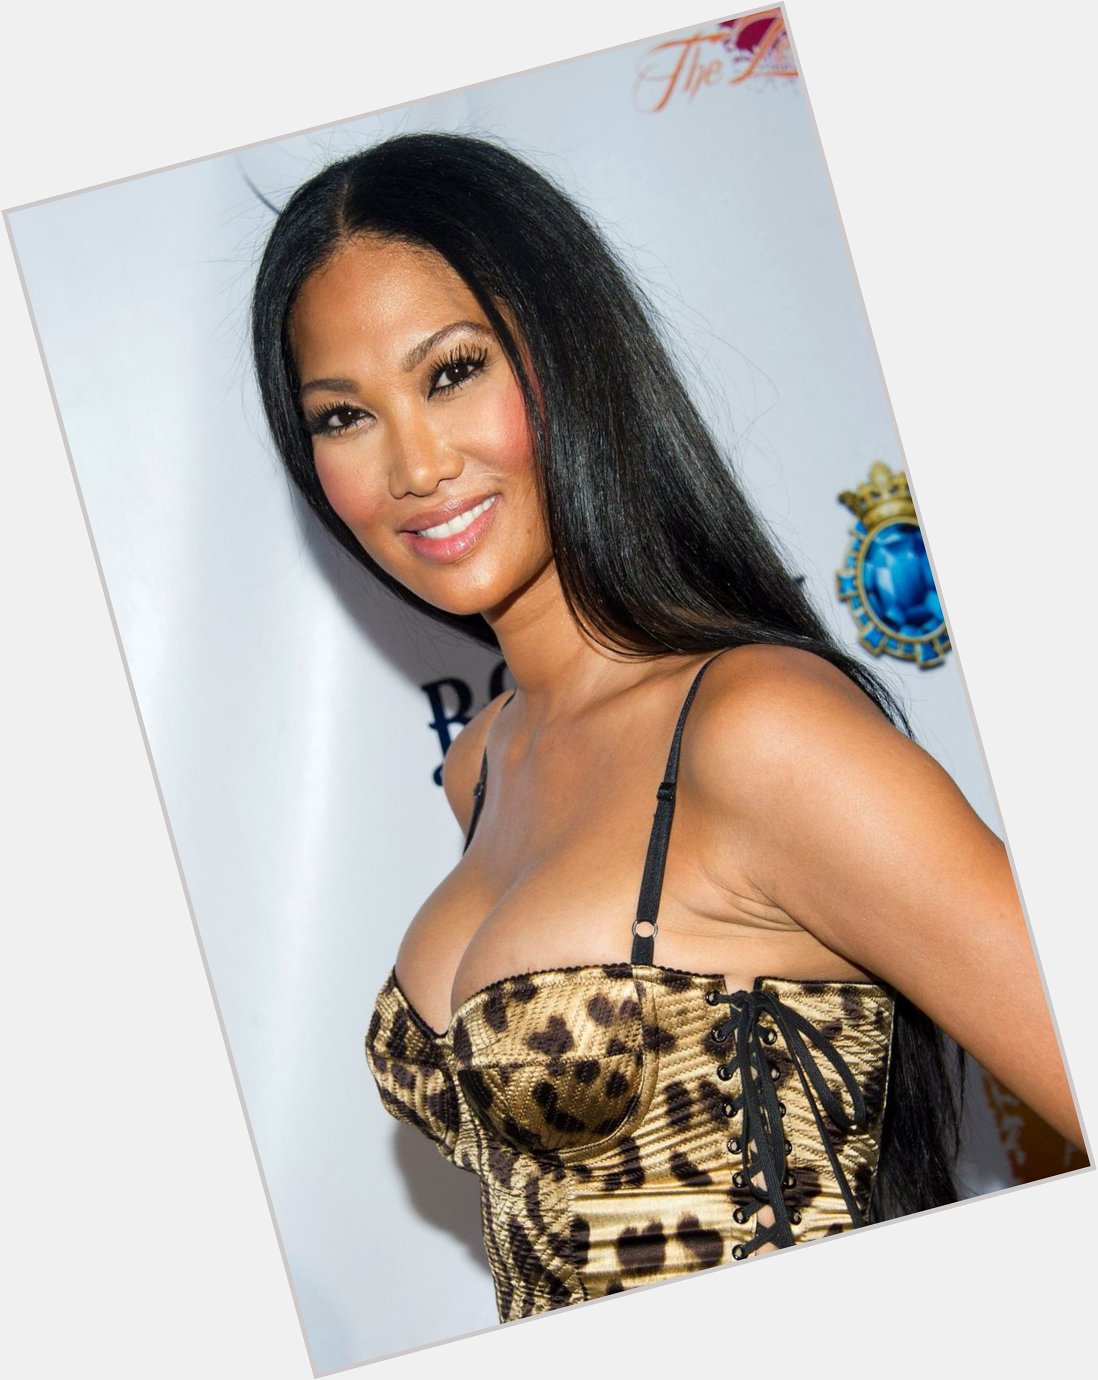 Happy Birthday to model and fashion designer Official Kimora Lee Simmons. She turns 42 today. 